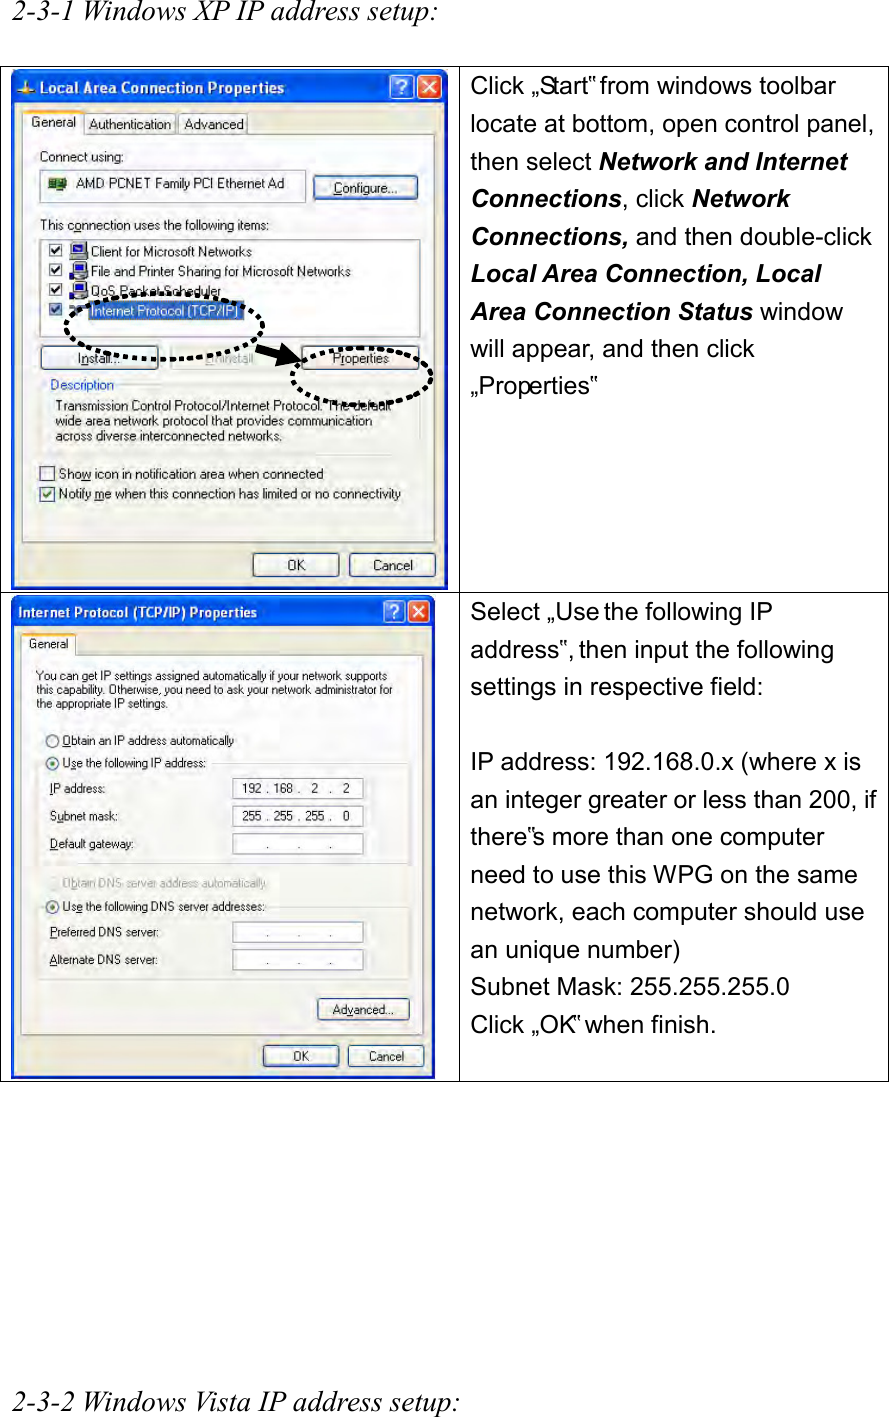 2-3-1 Windows XP IP address setup:   Click „Start‟ from windows toolbar locate at bottom, open control panel, then select Network and Internet Connections, click Network Connections, and then double-click Local Area Connection, Local Area Connection Status window will appear, and then click „Properties‟   Select „Use the following IP address‟, then input the following settings in respective field:  IP address: 192.168.0.x (where x is an integer greater or less than 200, if there‟s more than one computer need to use this WPG on the same network, each computer should use an unique number) Subnet Mask: 255.255.255.0 Click „OK‟ when finish.         2-3-2 Windows Vista IP address setup: 